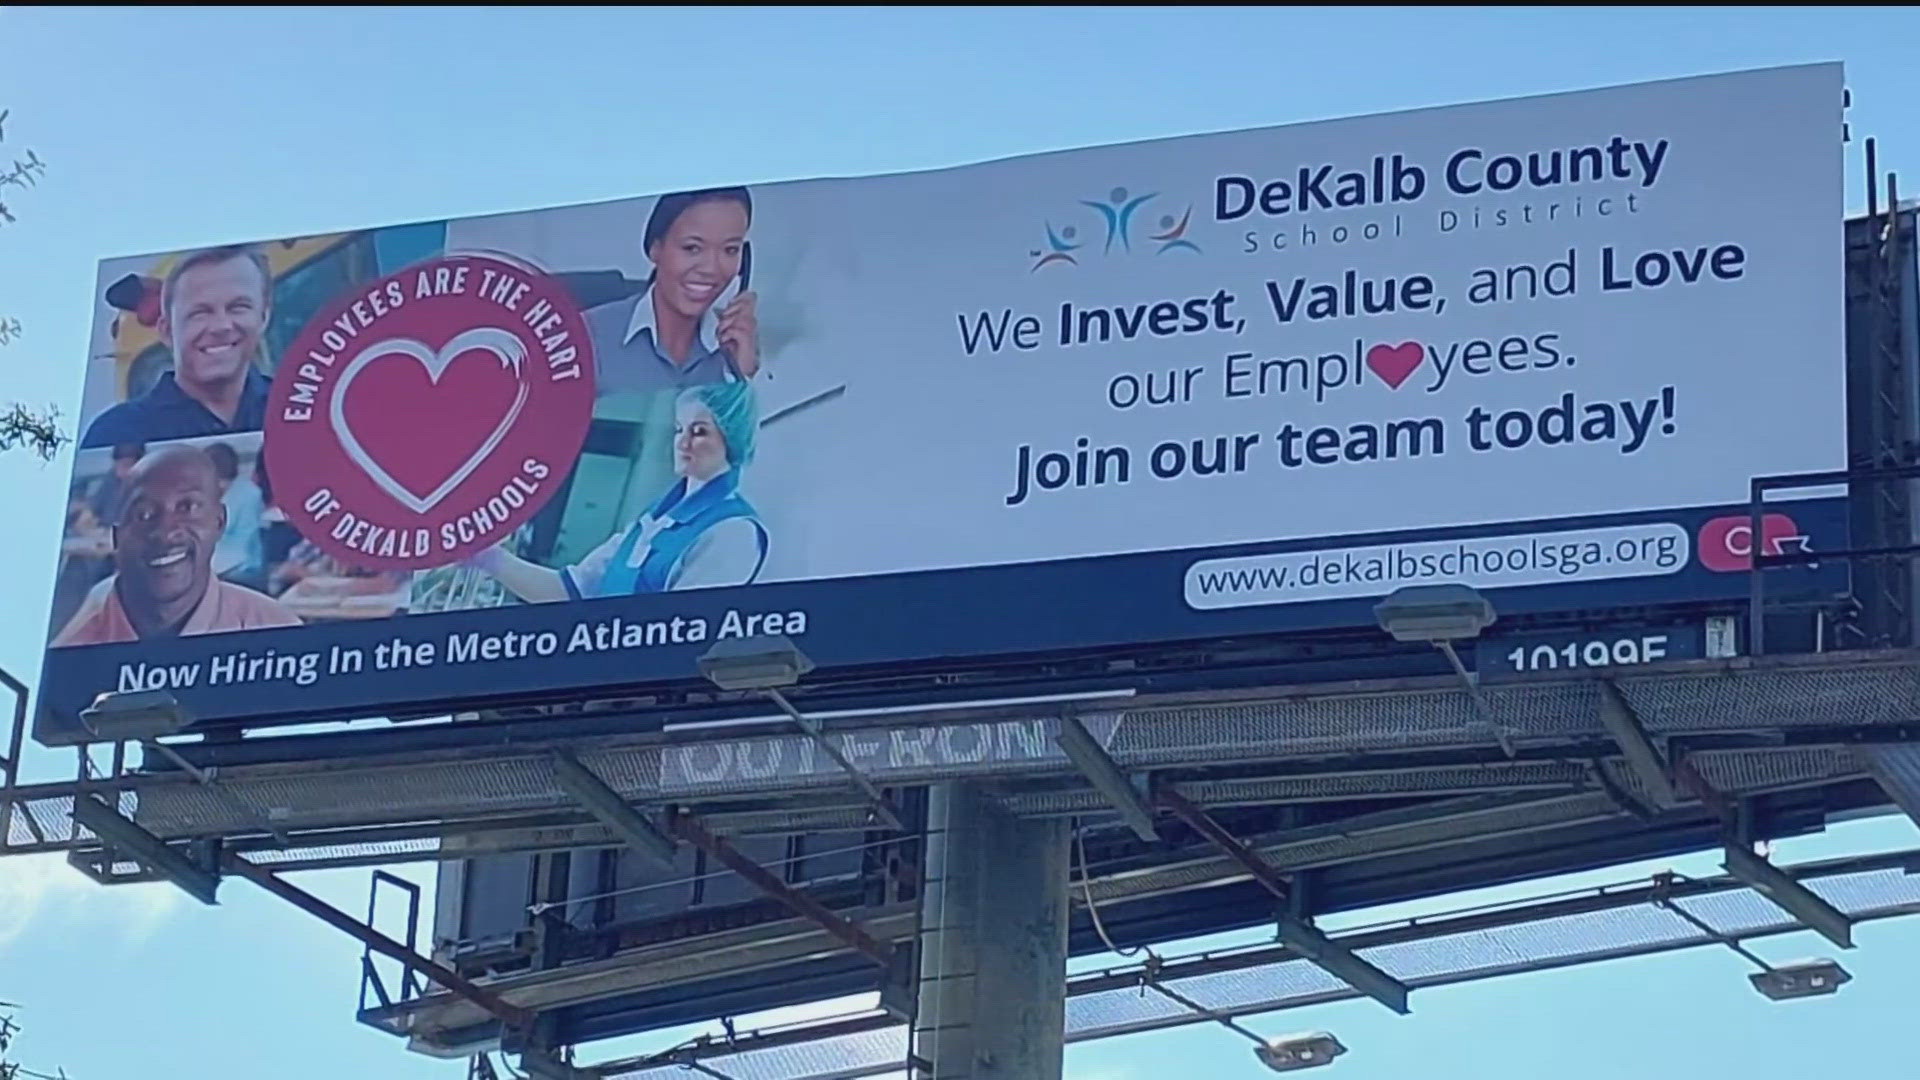 DeKalb County School District is experiencing a hiring boom, but despite the growth, the district continues to expand its recruitment efforts in new strategic ways.